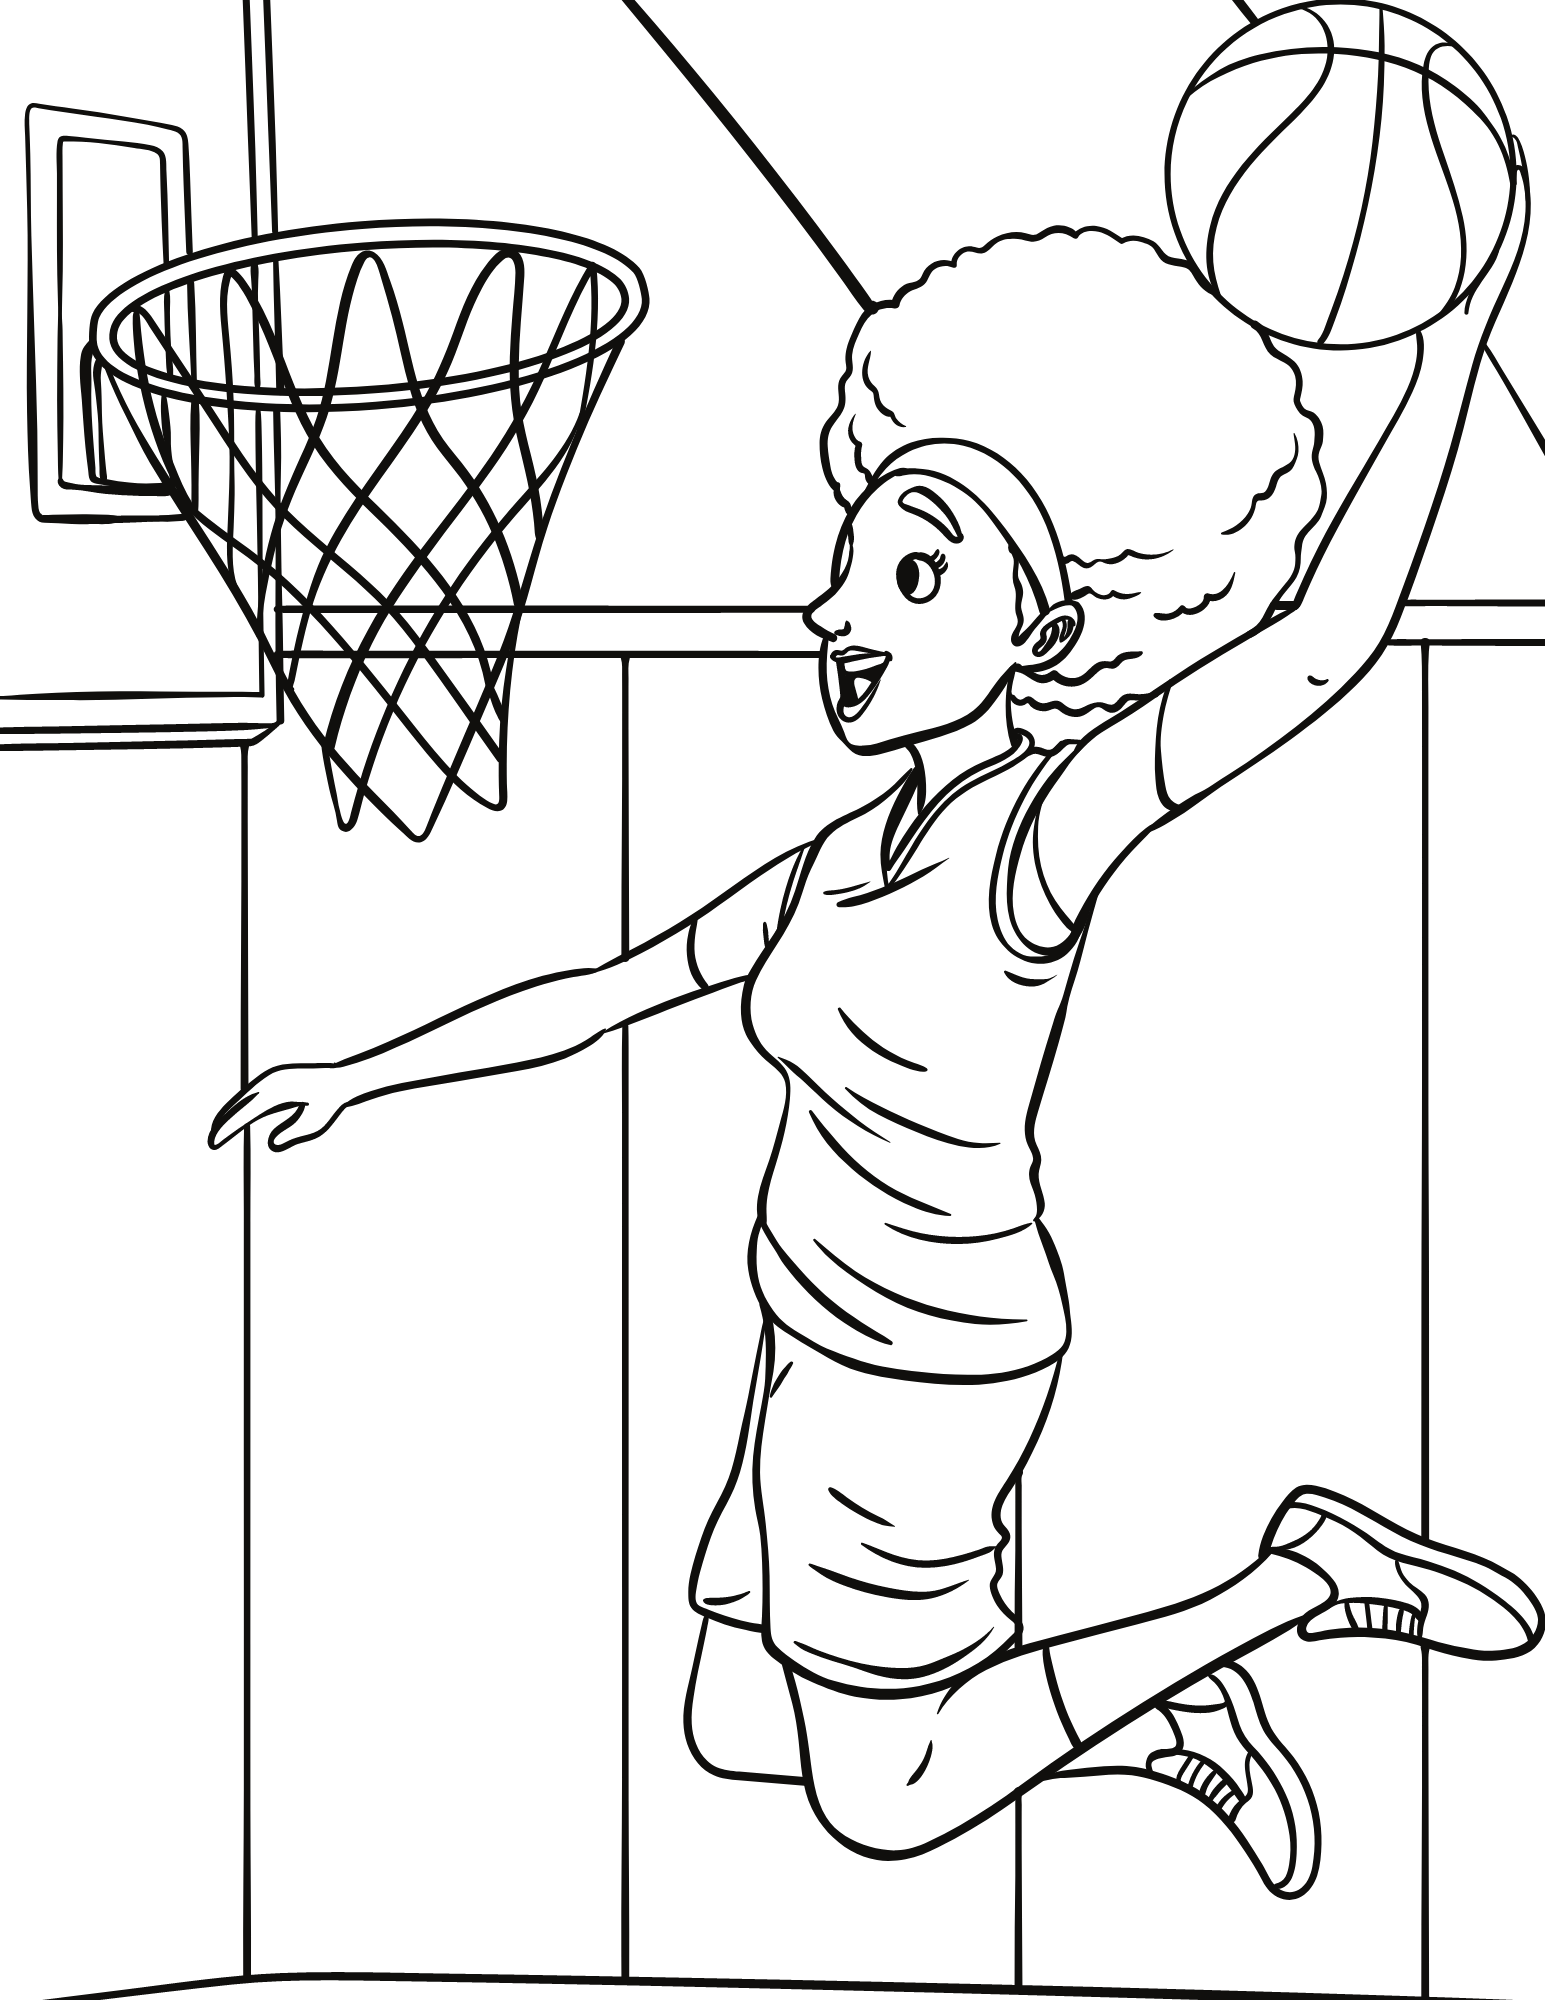 Free Basketball Coloring Pages for Kids and Adults